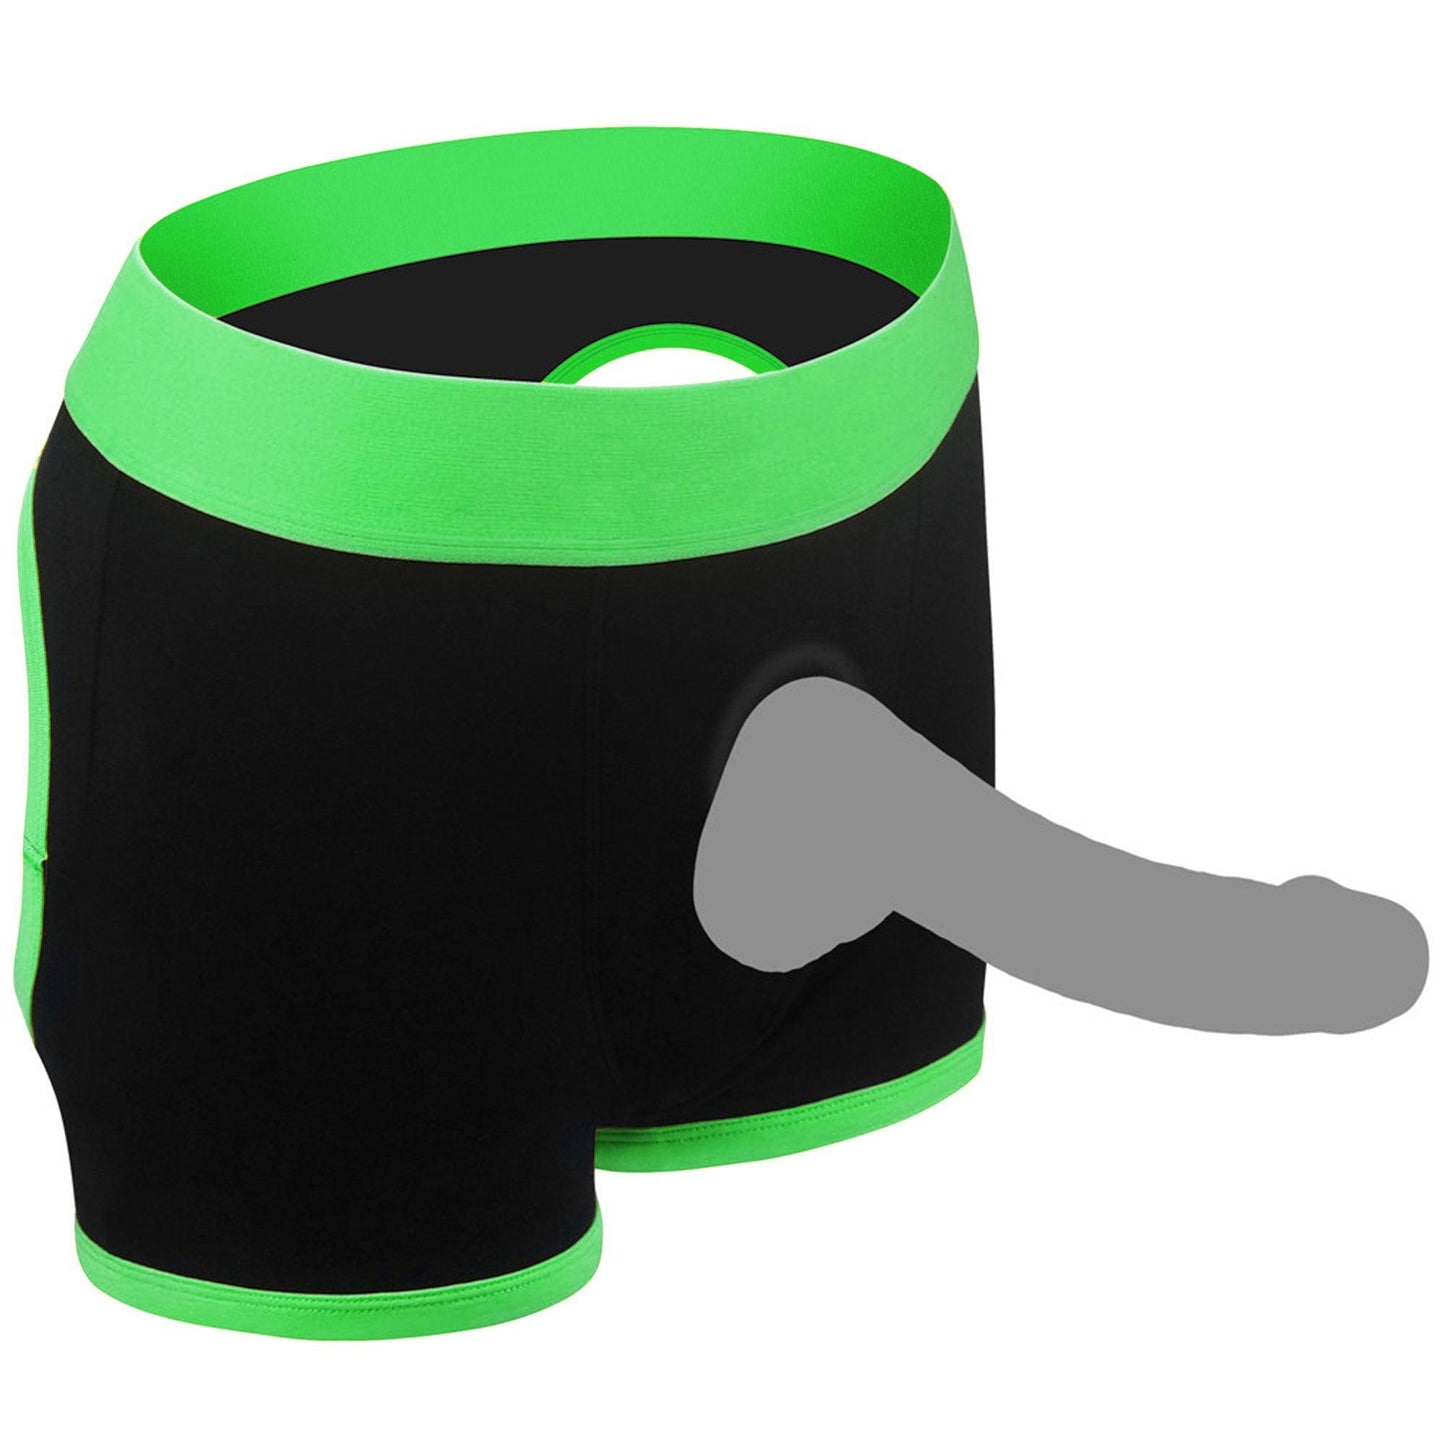 Get Lucky Strap on Boxer Shorts - Xsmall-Small - Green/black - My Sex Toy Hub